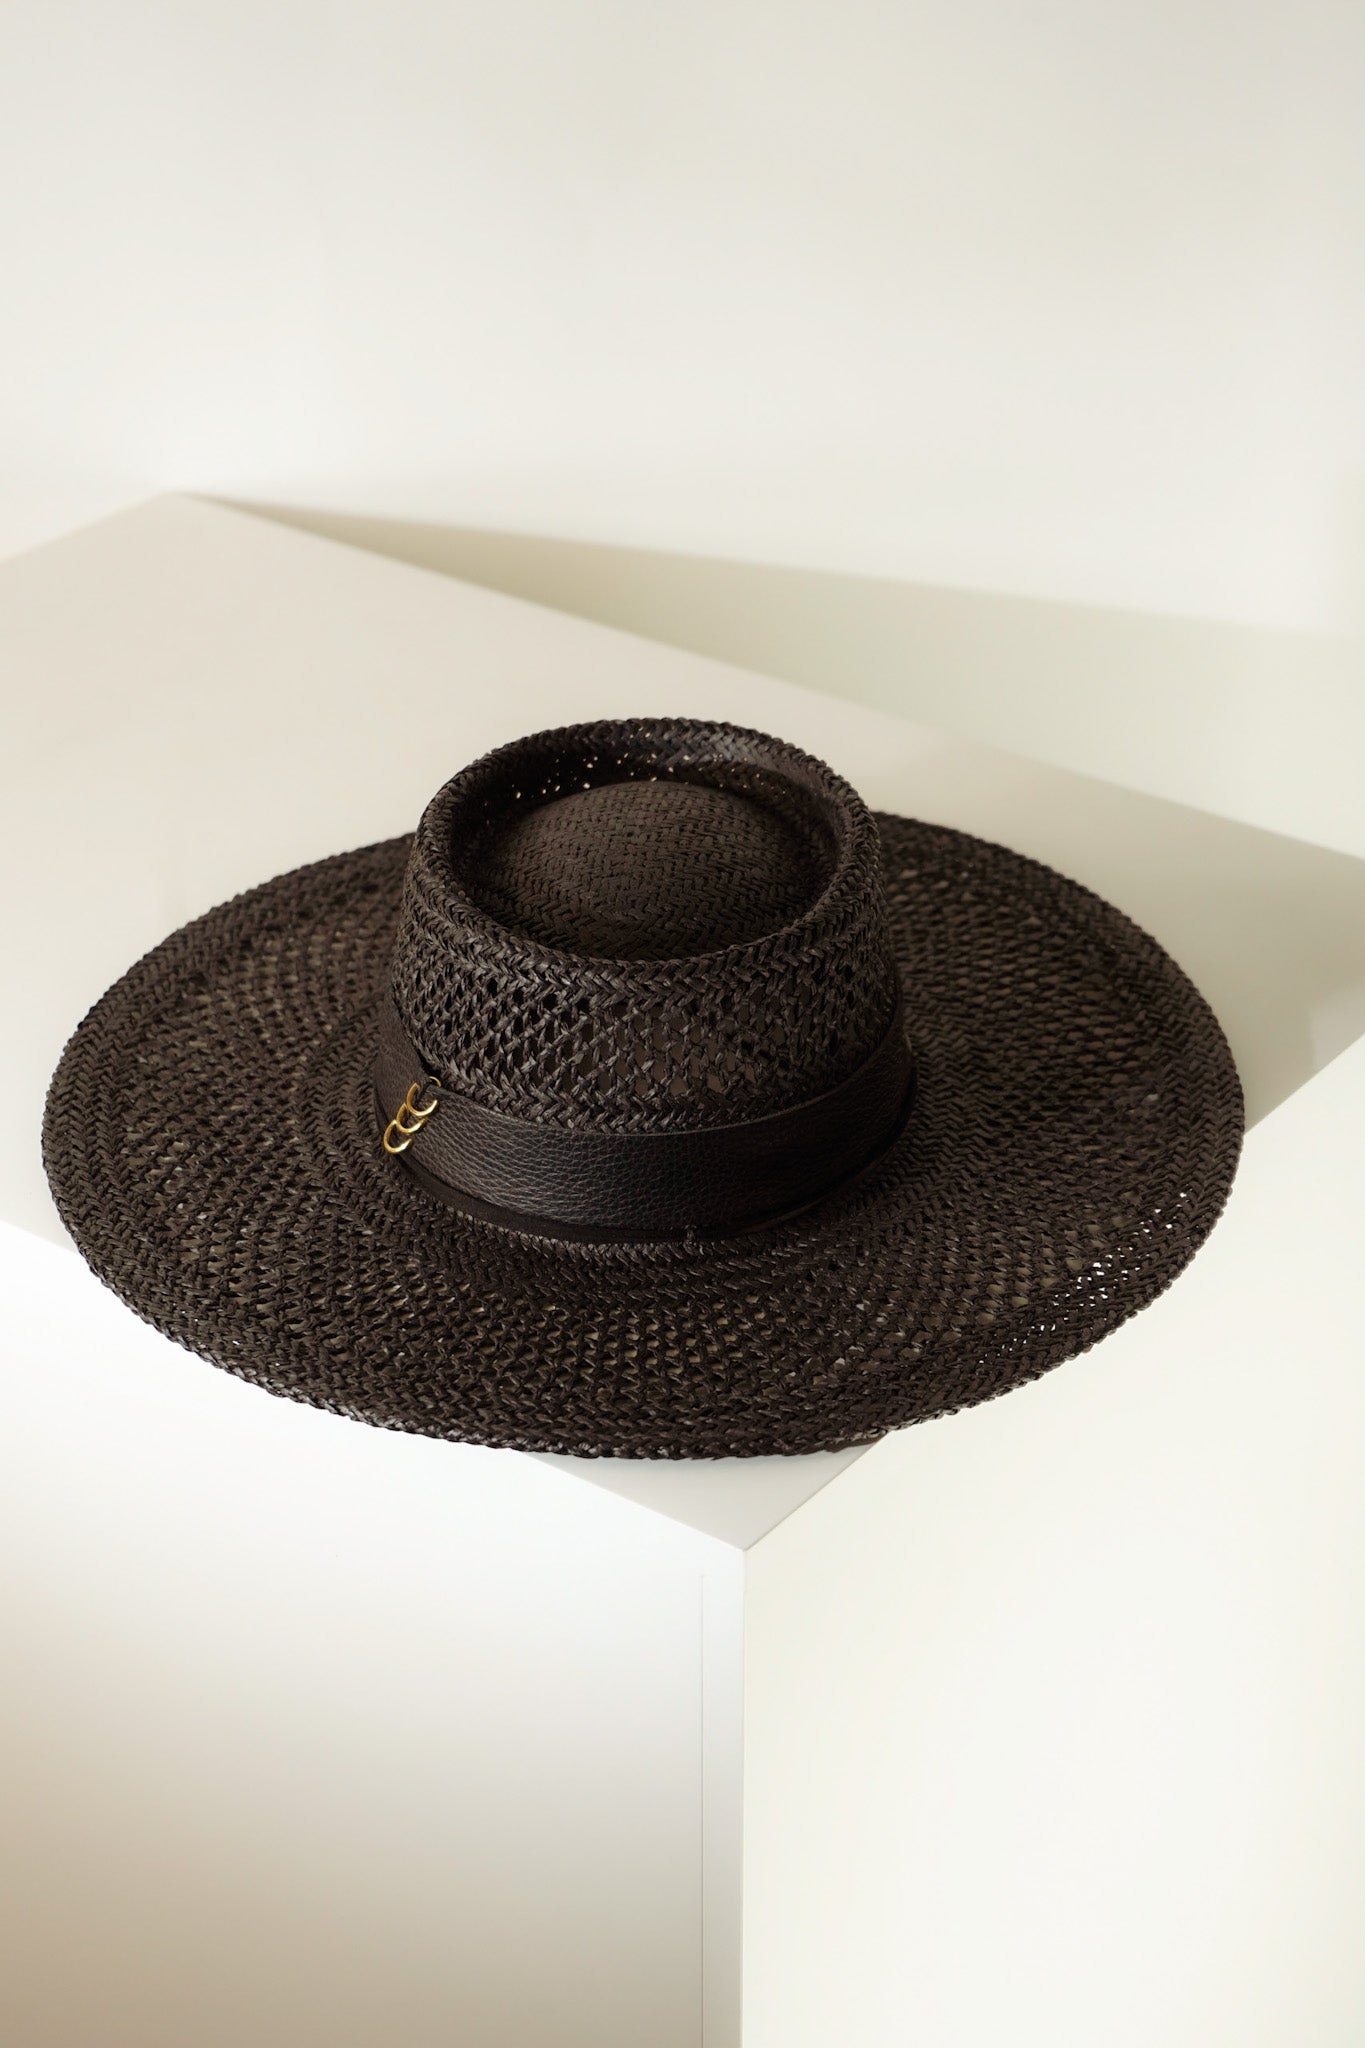 black-wide-brim-straw-hat-cord-knotted